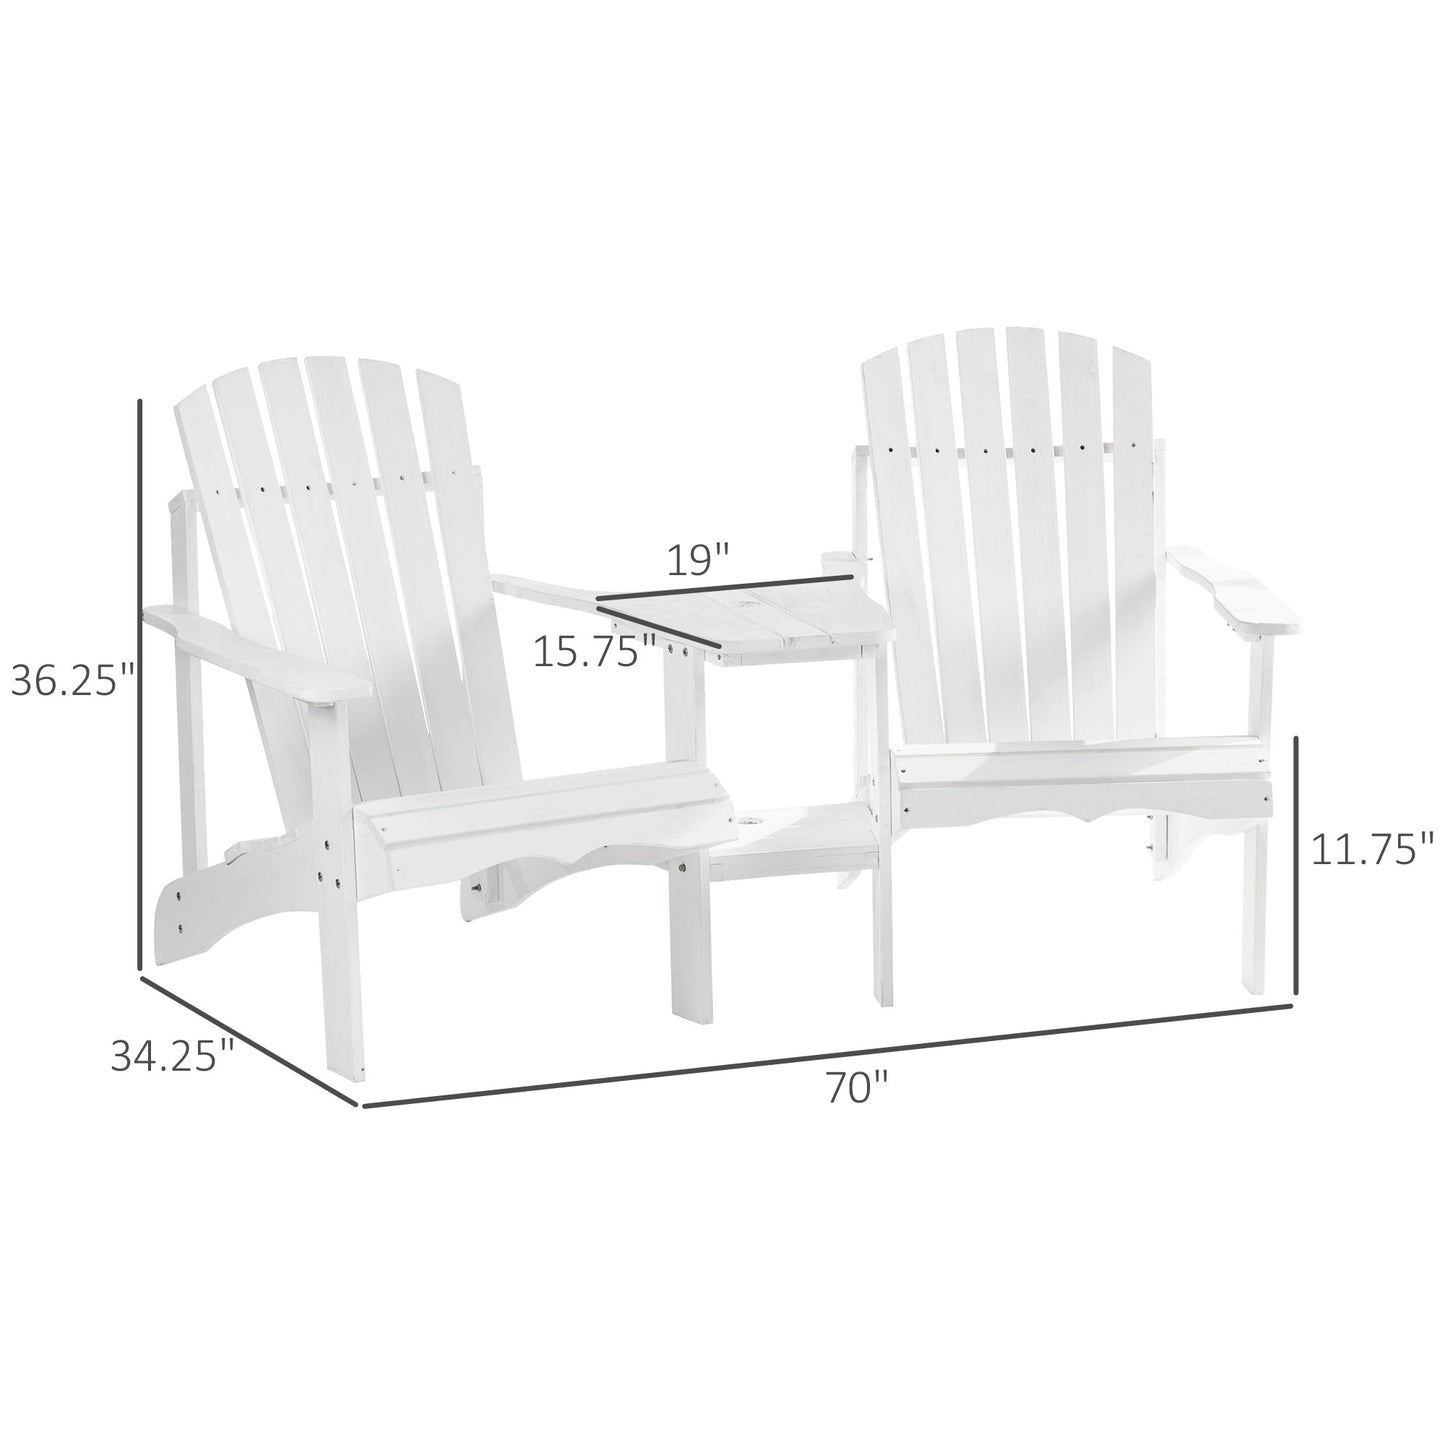 Outdoor and Garden-Set of 2 Wooden Adirondack Chairs, Outdoor Double Seat with Center Table and Umbrella Hole for Patio, Backyard, Deck, Fire Pit, White - Outdoor Style Company